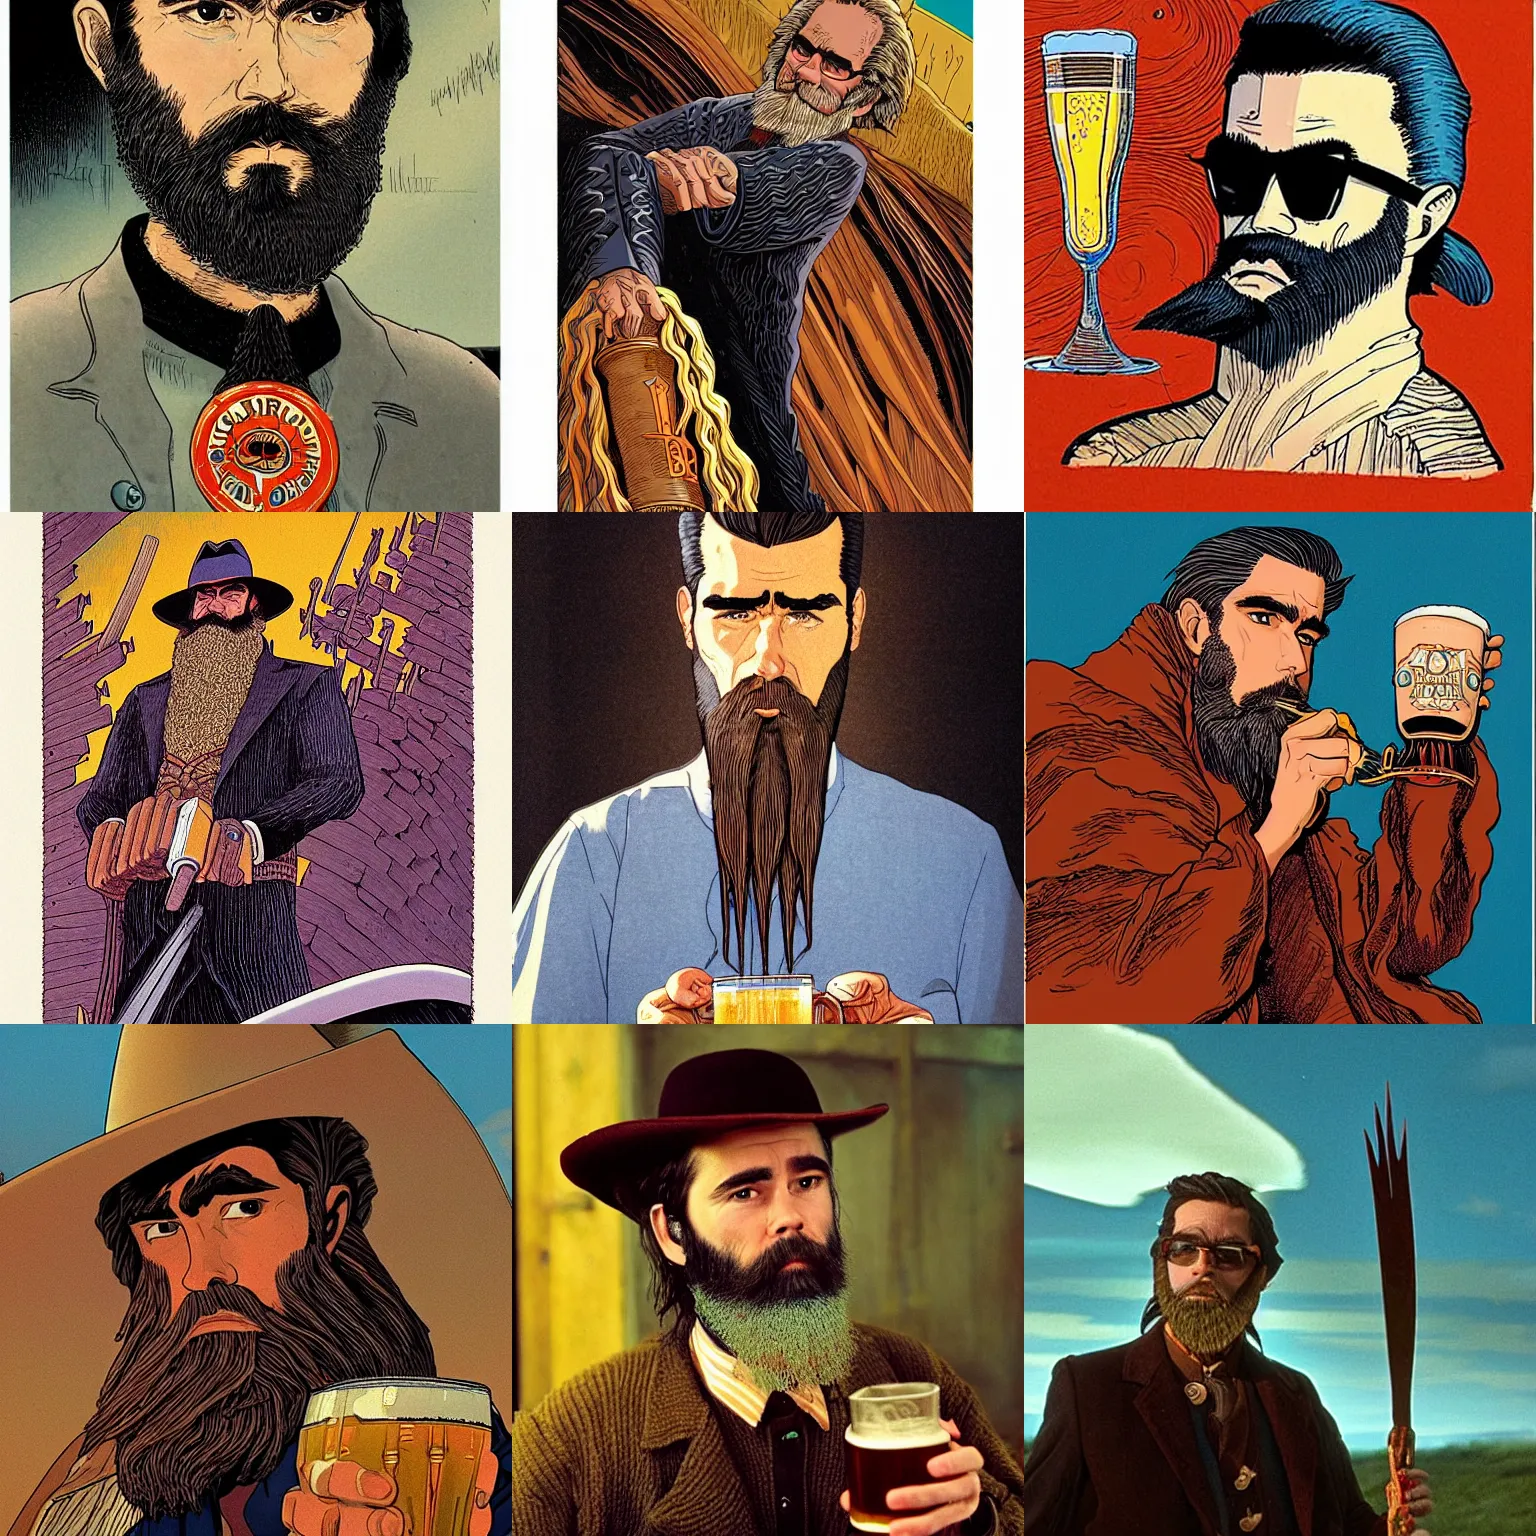 Prompt: Jean Giraud style long black forked braid beard thick eyebrows colin farrel drinking a pint of beer